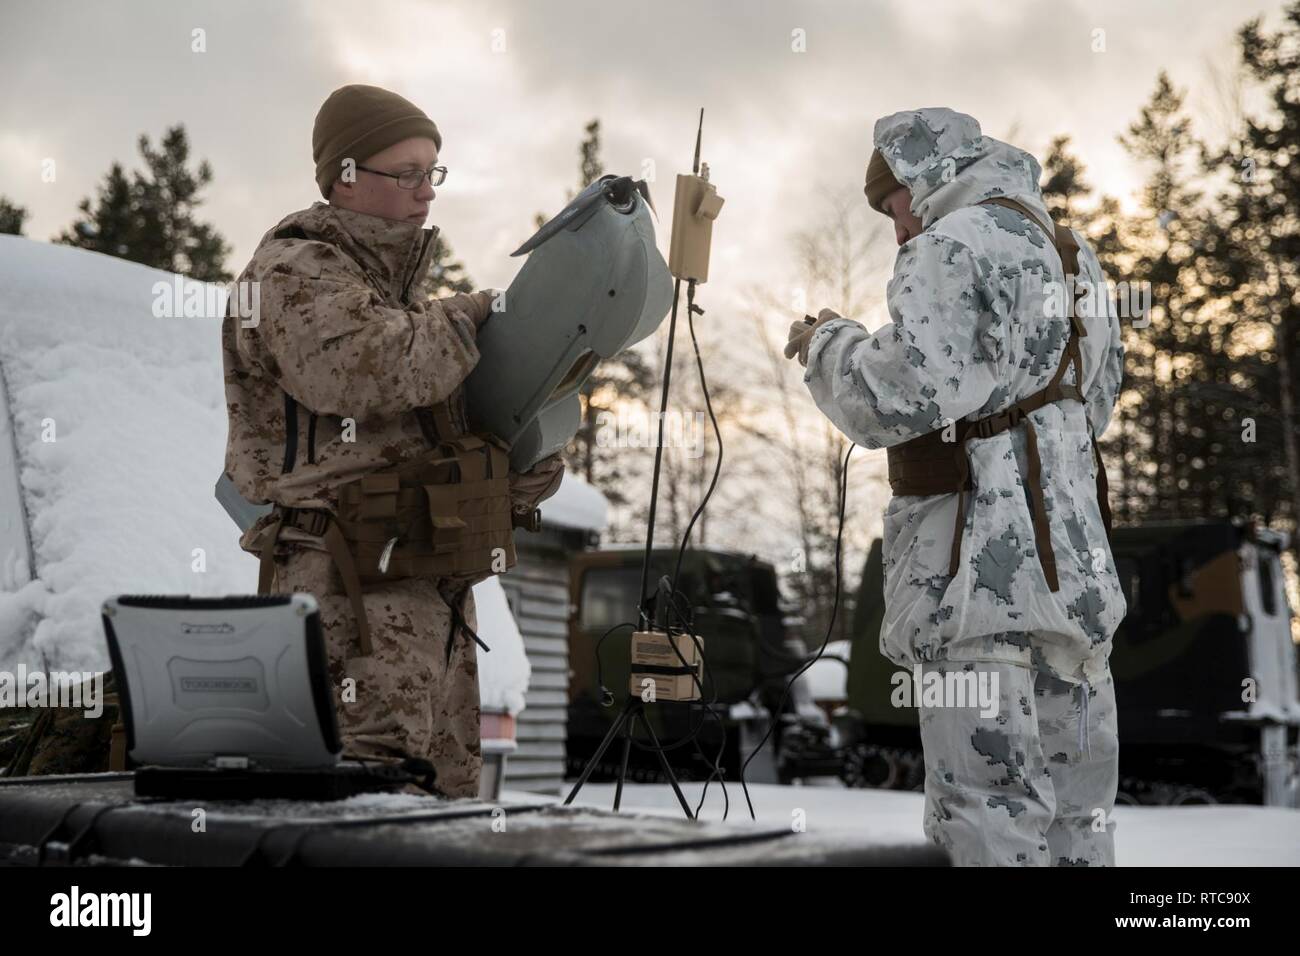 U.S. Marines with Marine Rotational Force-Europe 19.1, Marine Forces Europe and Africa, assemble an RQ-20B Puma unmanned aerial vehicle during Exercise Snow Panzer in Setermoen, Norway, Feb. 11, 2019. Snow Panzer is a force-on-force bilateral exercise between MRF-E and the Panzer Battalion of Brigade Nord. Stock Photo